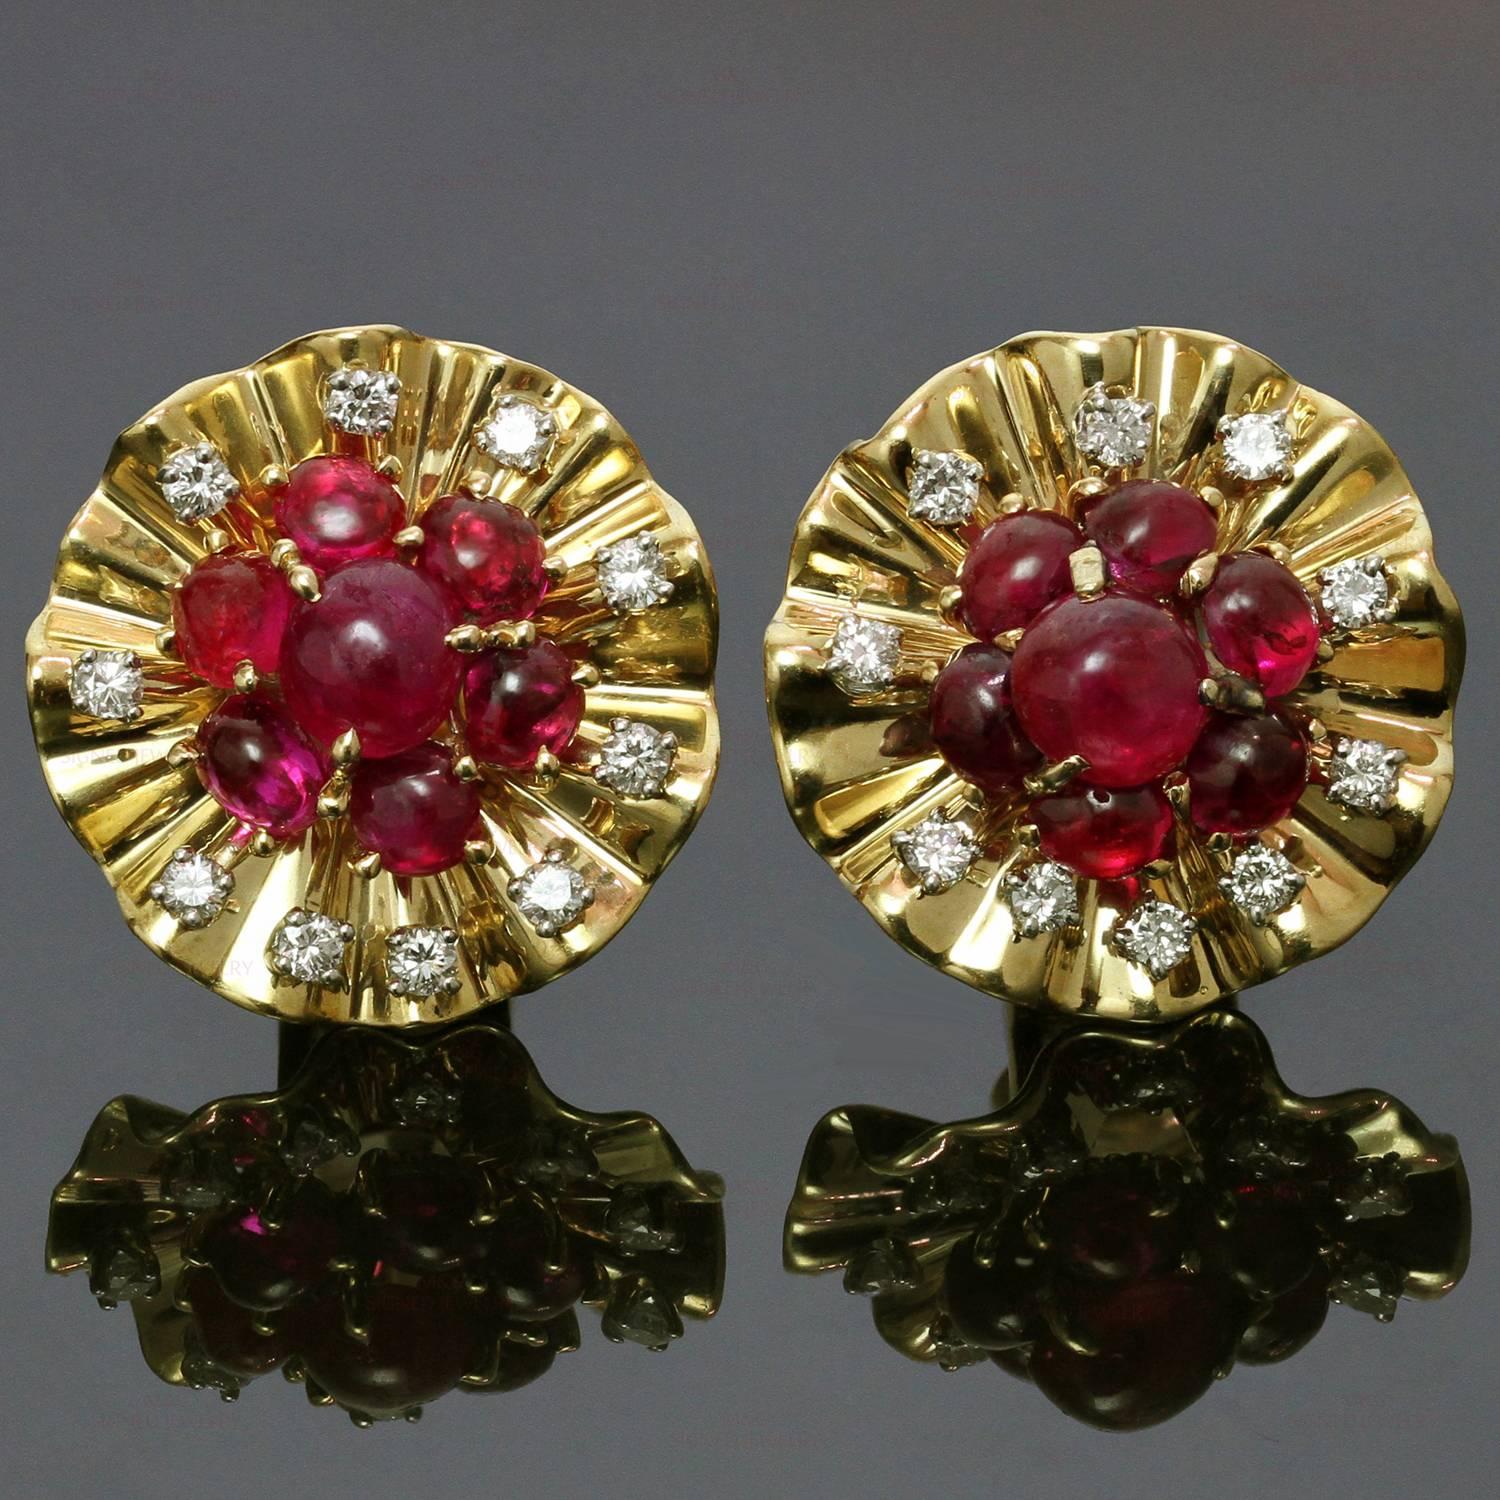 These vintage Trabet & Hoeffer Mauboussin clip-on earrings feature a bright fluted design crafted in 14k yellow gold and prong-set with 14 cabochon Burmese rubies. The unheated rubies are all natural with no treatment, GIA certified. Made in United